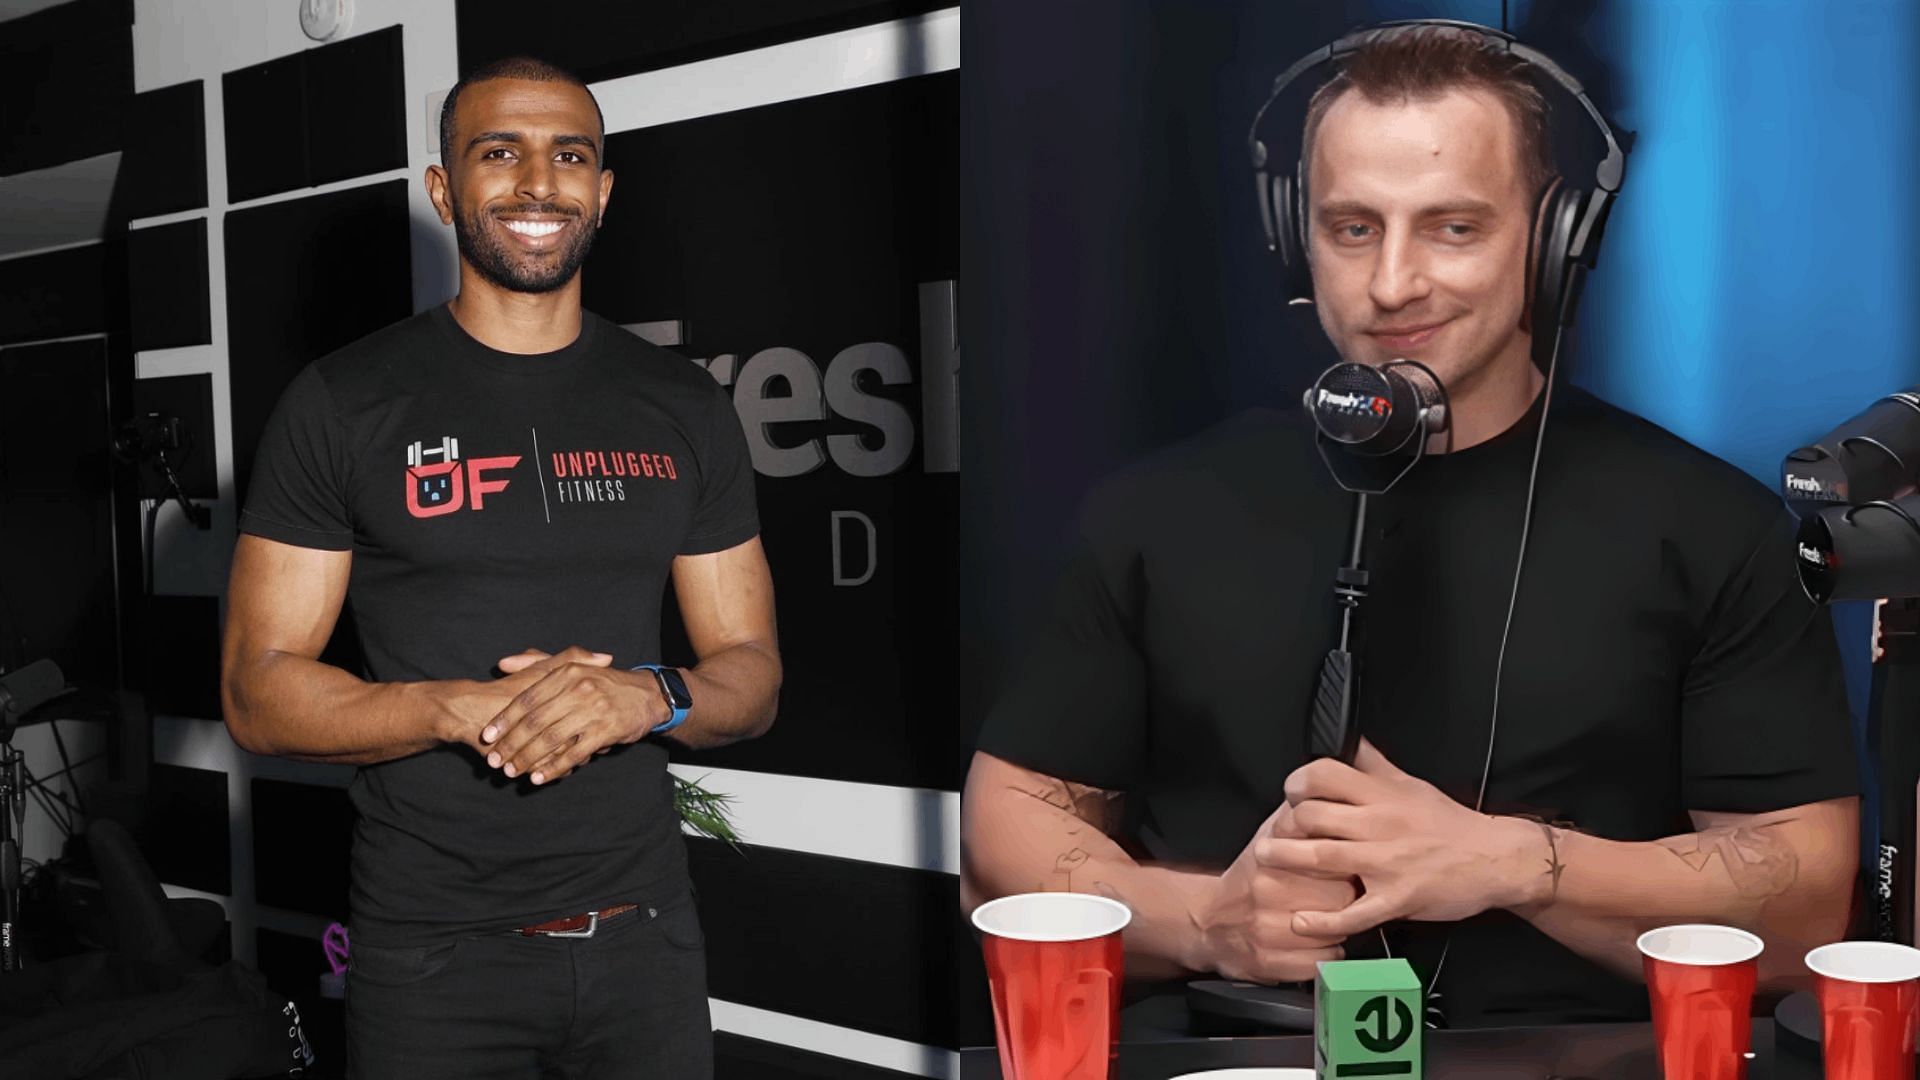 Kick streamer Vitaly challenged F&amp;F host Myron to a boxing match (Image via DramaAlert/X and unplugfit/Instagram)